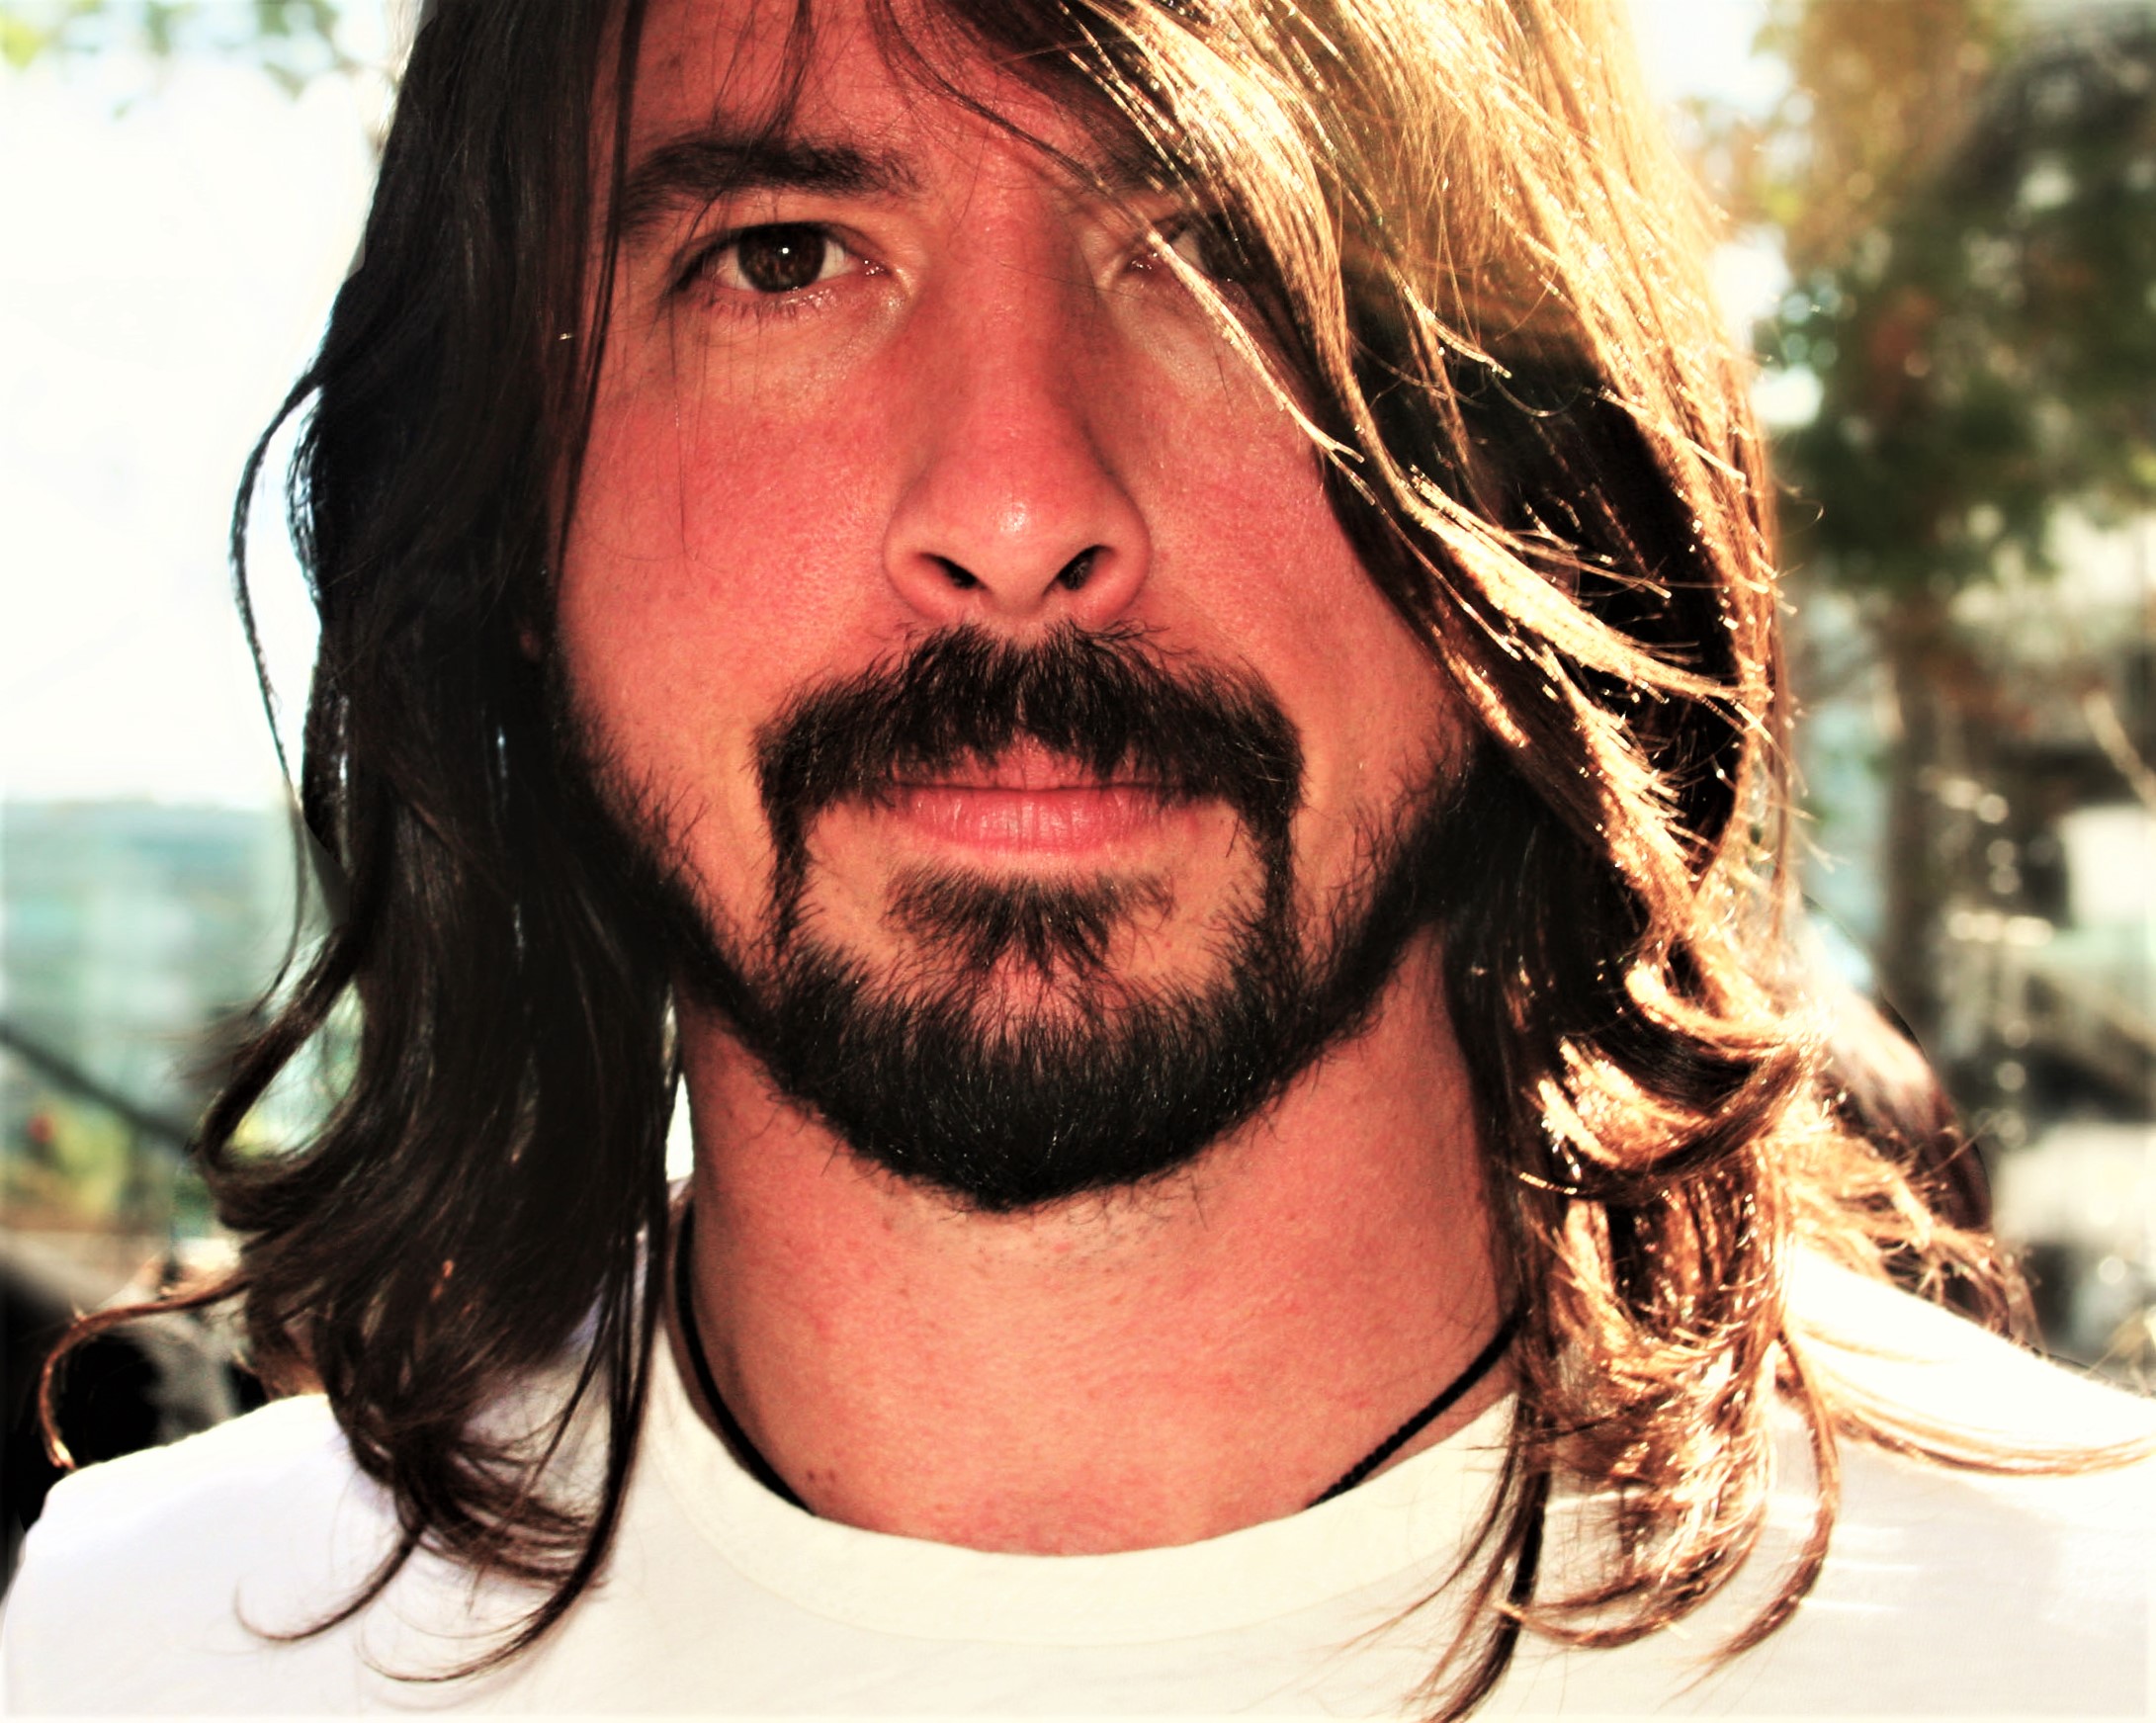 Dave Grohl’s Van Life Documentary ‘What Drives Us’ Set For April 30